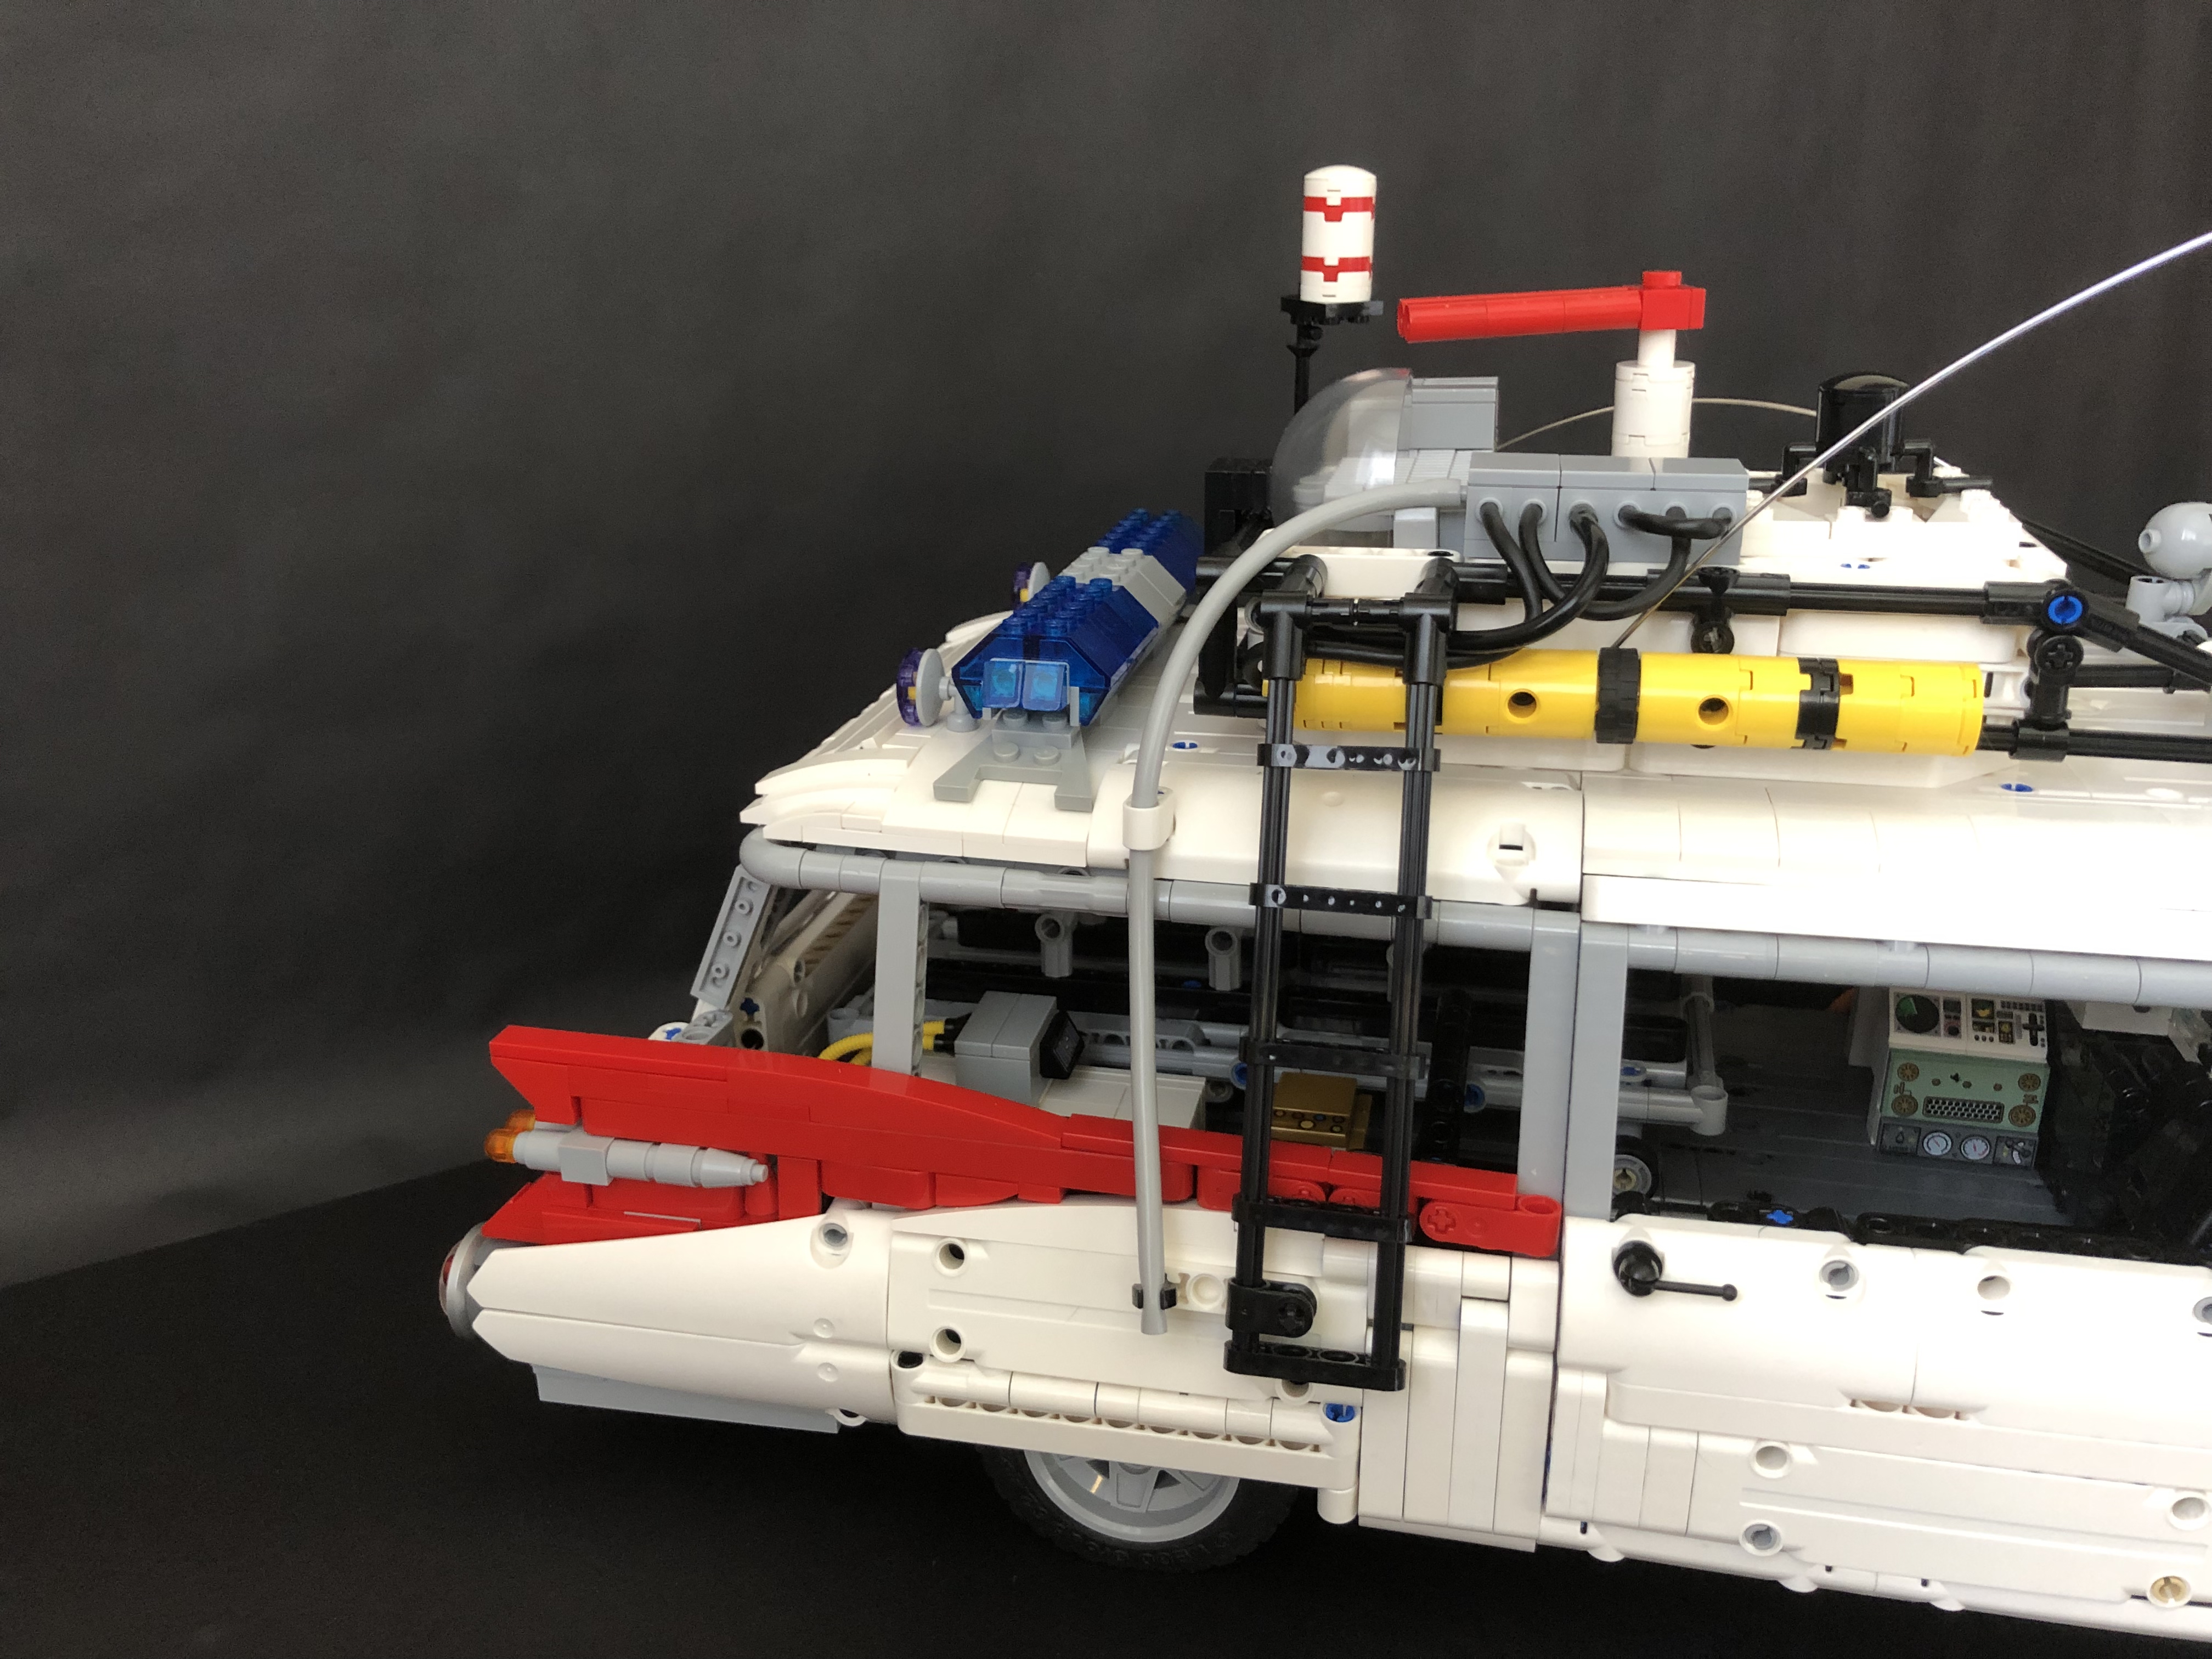 Ghostbusters Ecto1